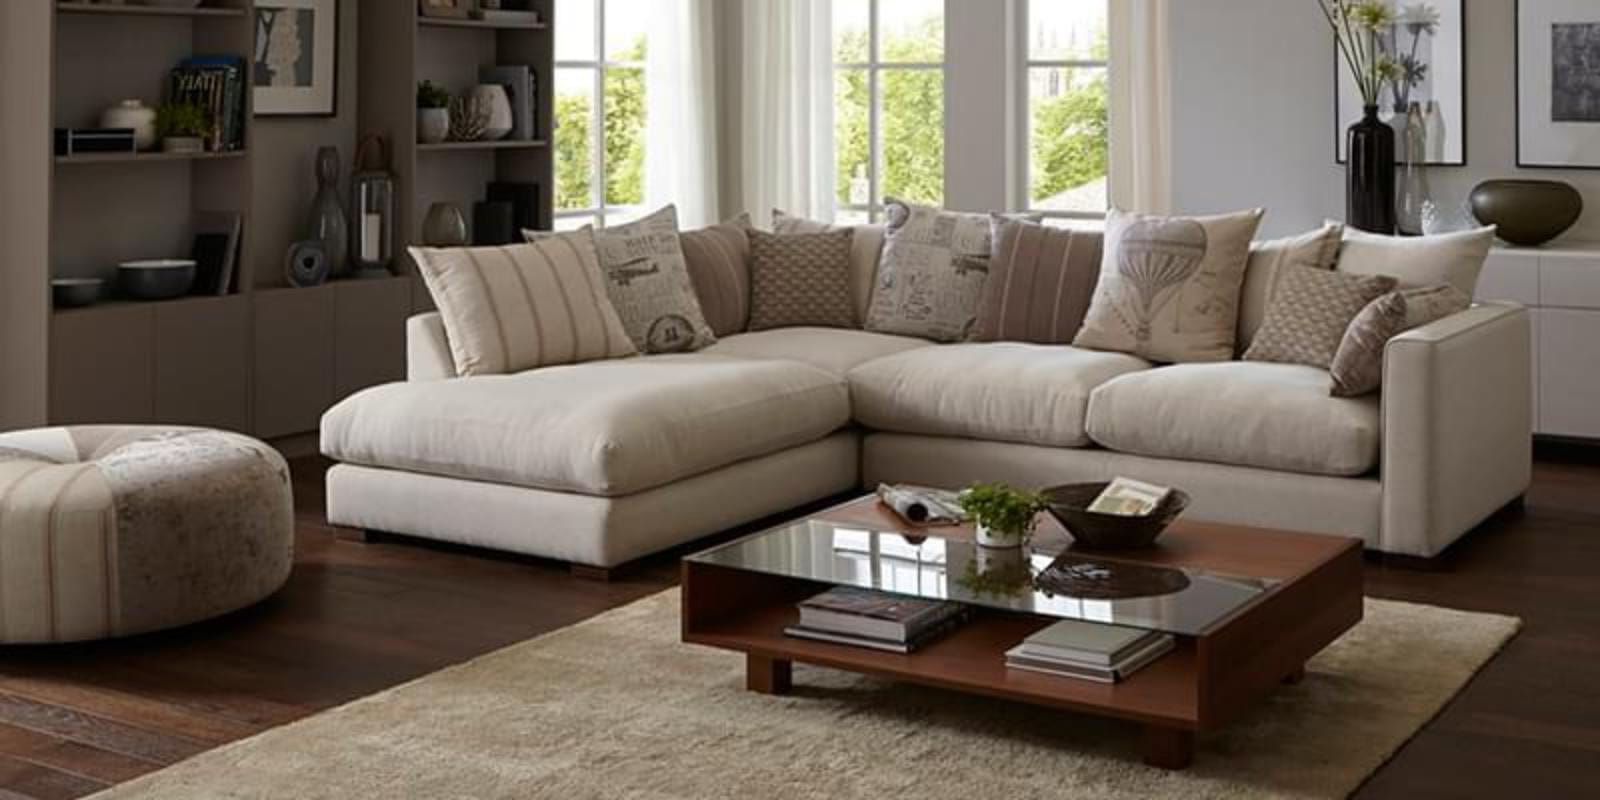 20+ L Shaped Sofa Beige With Regard To Small L Shaped Sectional Sofas In Beige (View 18 of 20)